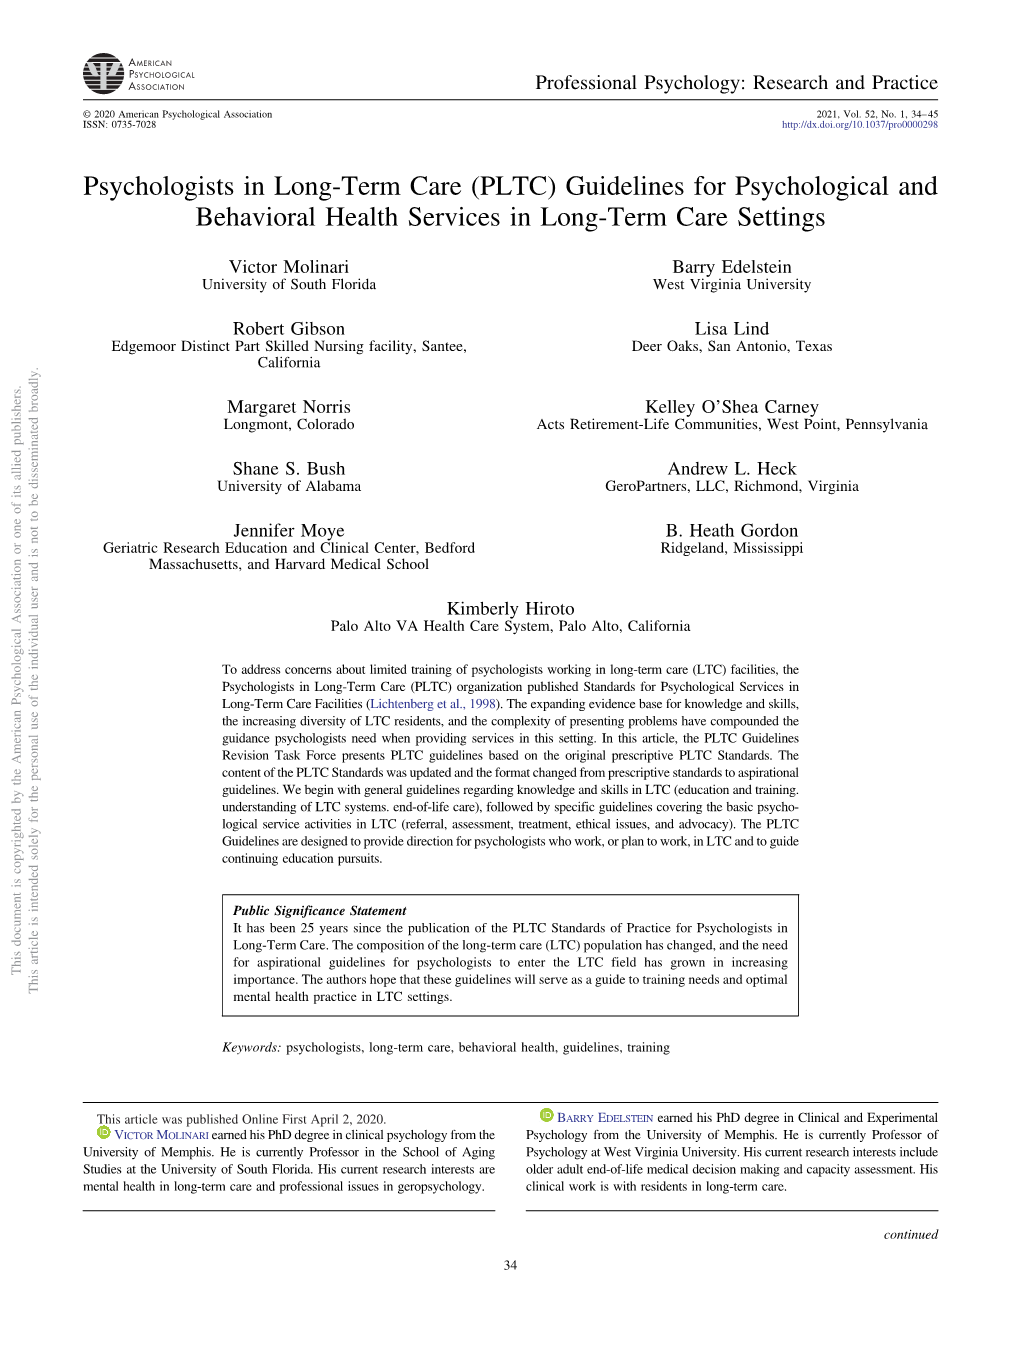 Psychologists in Long-Term Care (PLTC) Guidelines for Psychological and Behavioral Health Services in Long-Term Care Settings